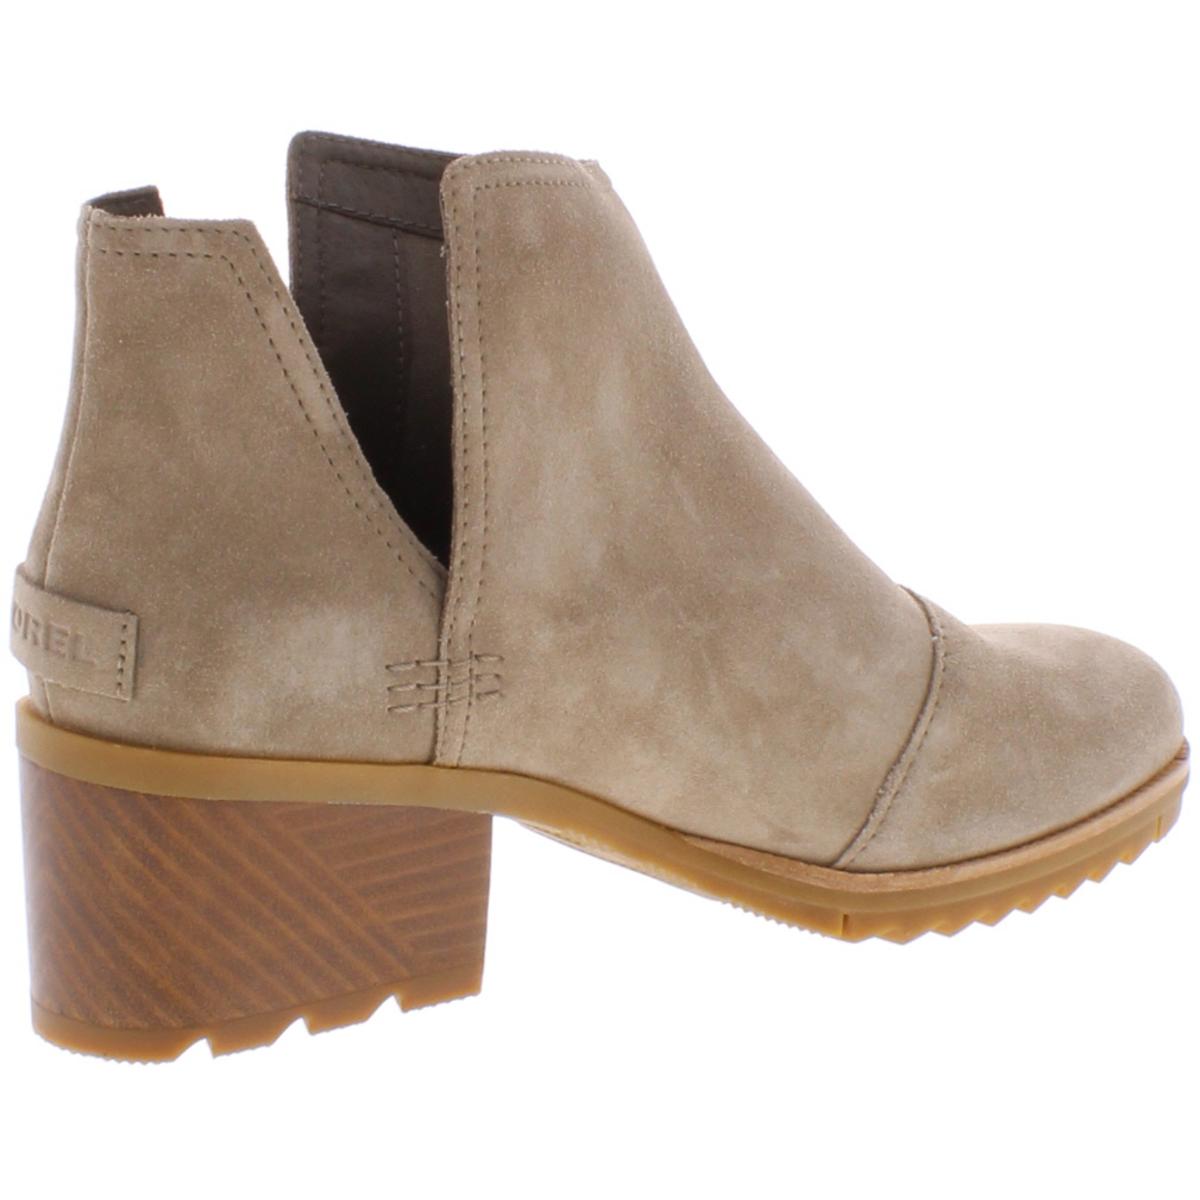 Sorel Womens Cate Taupe Suede Chunky Ankle Boots Shoes 9 Medium (B,M ...